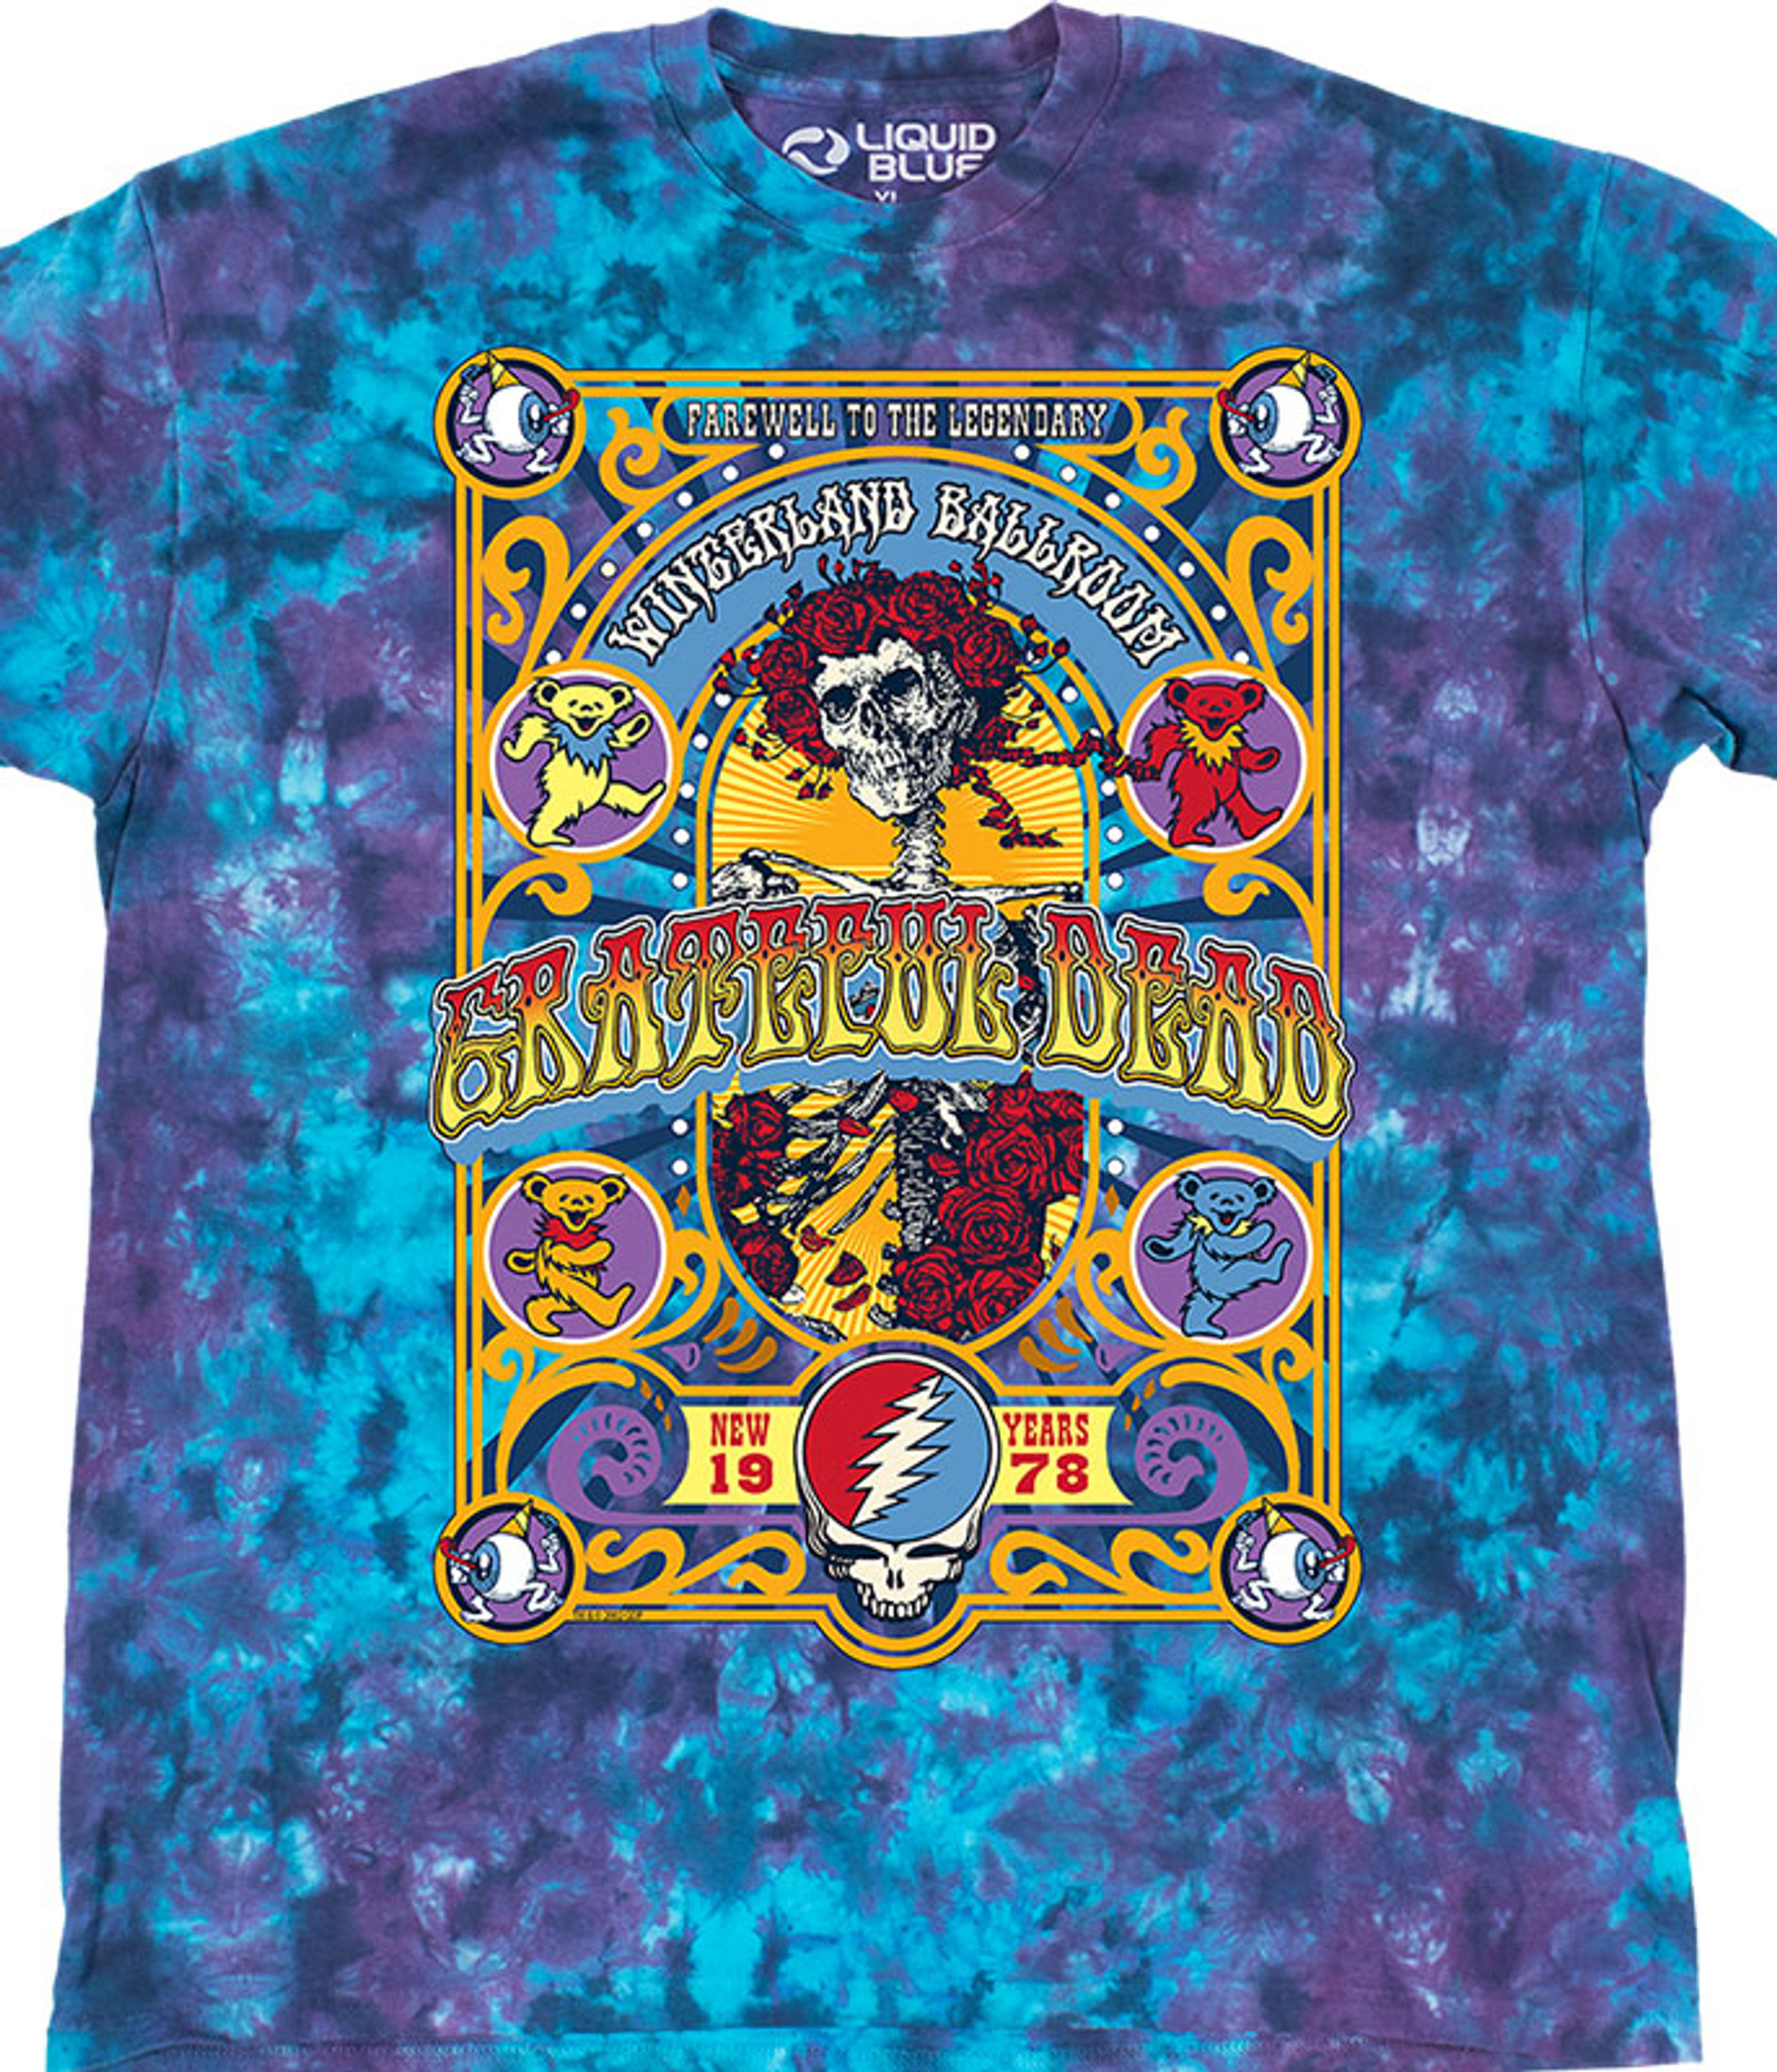 San Francisco Giants Share T-Shirt Design for Jerry Garcia Tribute